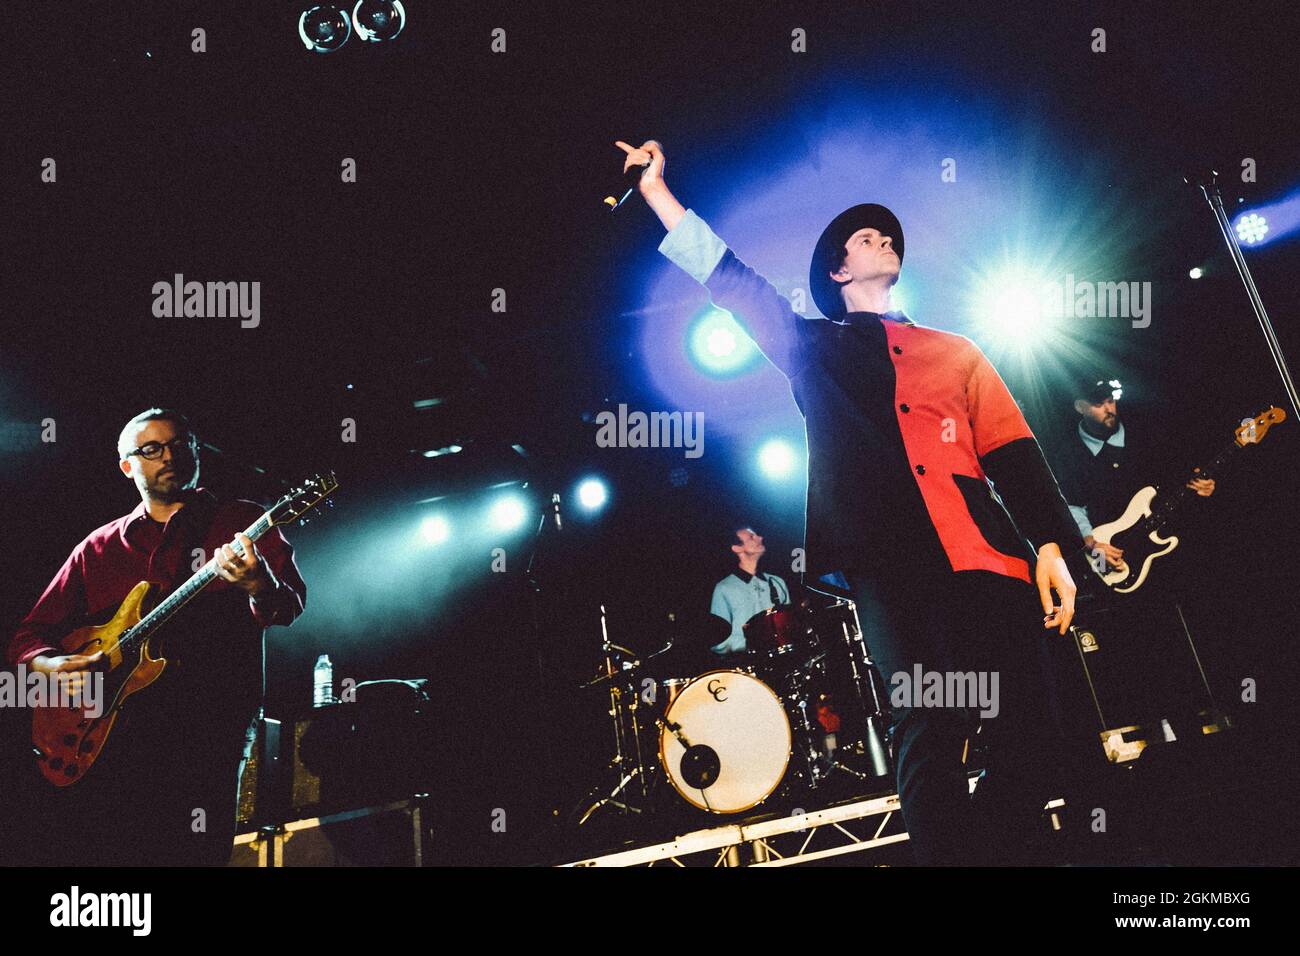 Newcastle, UK - 14.09.21: Maximo Park perform onstage at Newcastle University Students Union. The band performed their most recent album, Nature Always Wins, and second album Our Earthly Pleasures, in full. Photo Credit: Thomas Jackson / Alamy Live News. Stock Photo